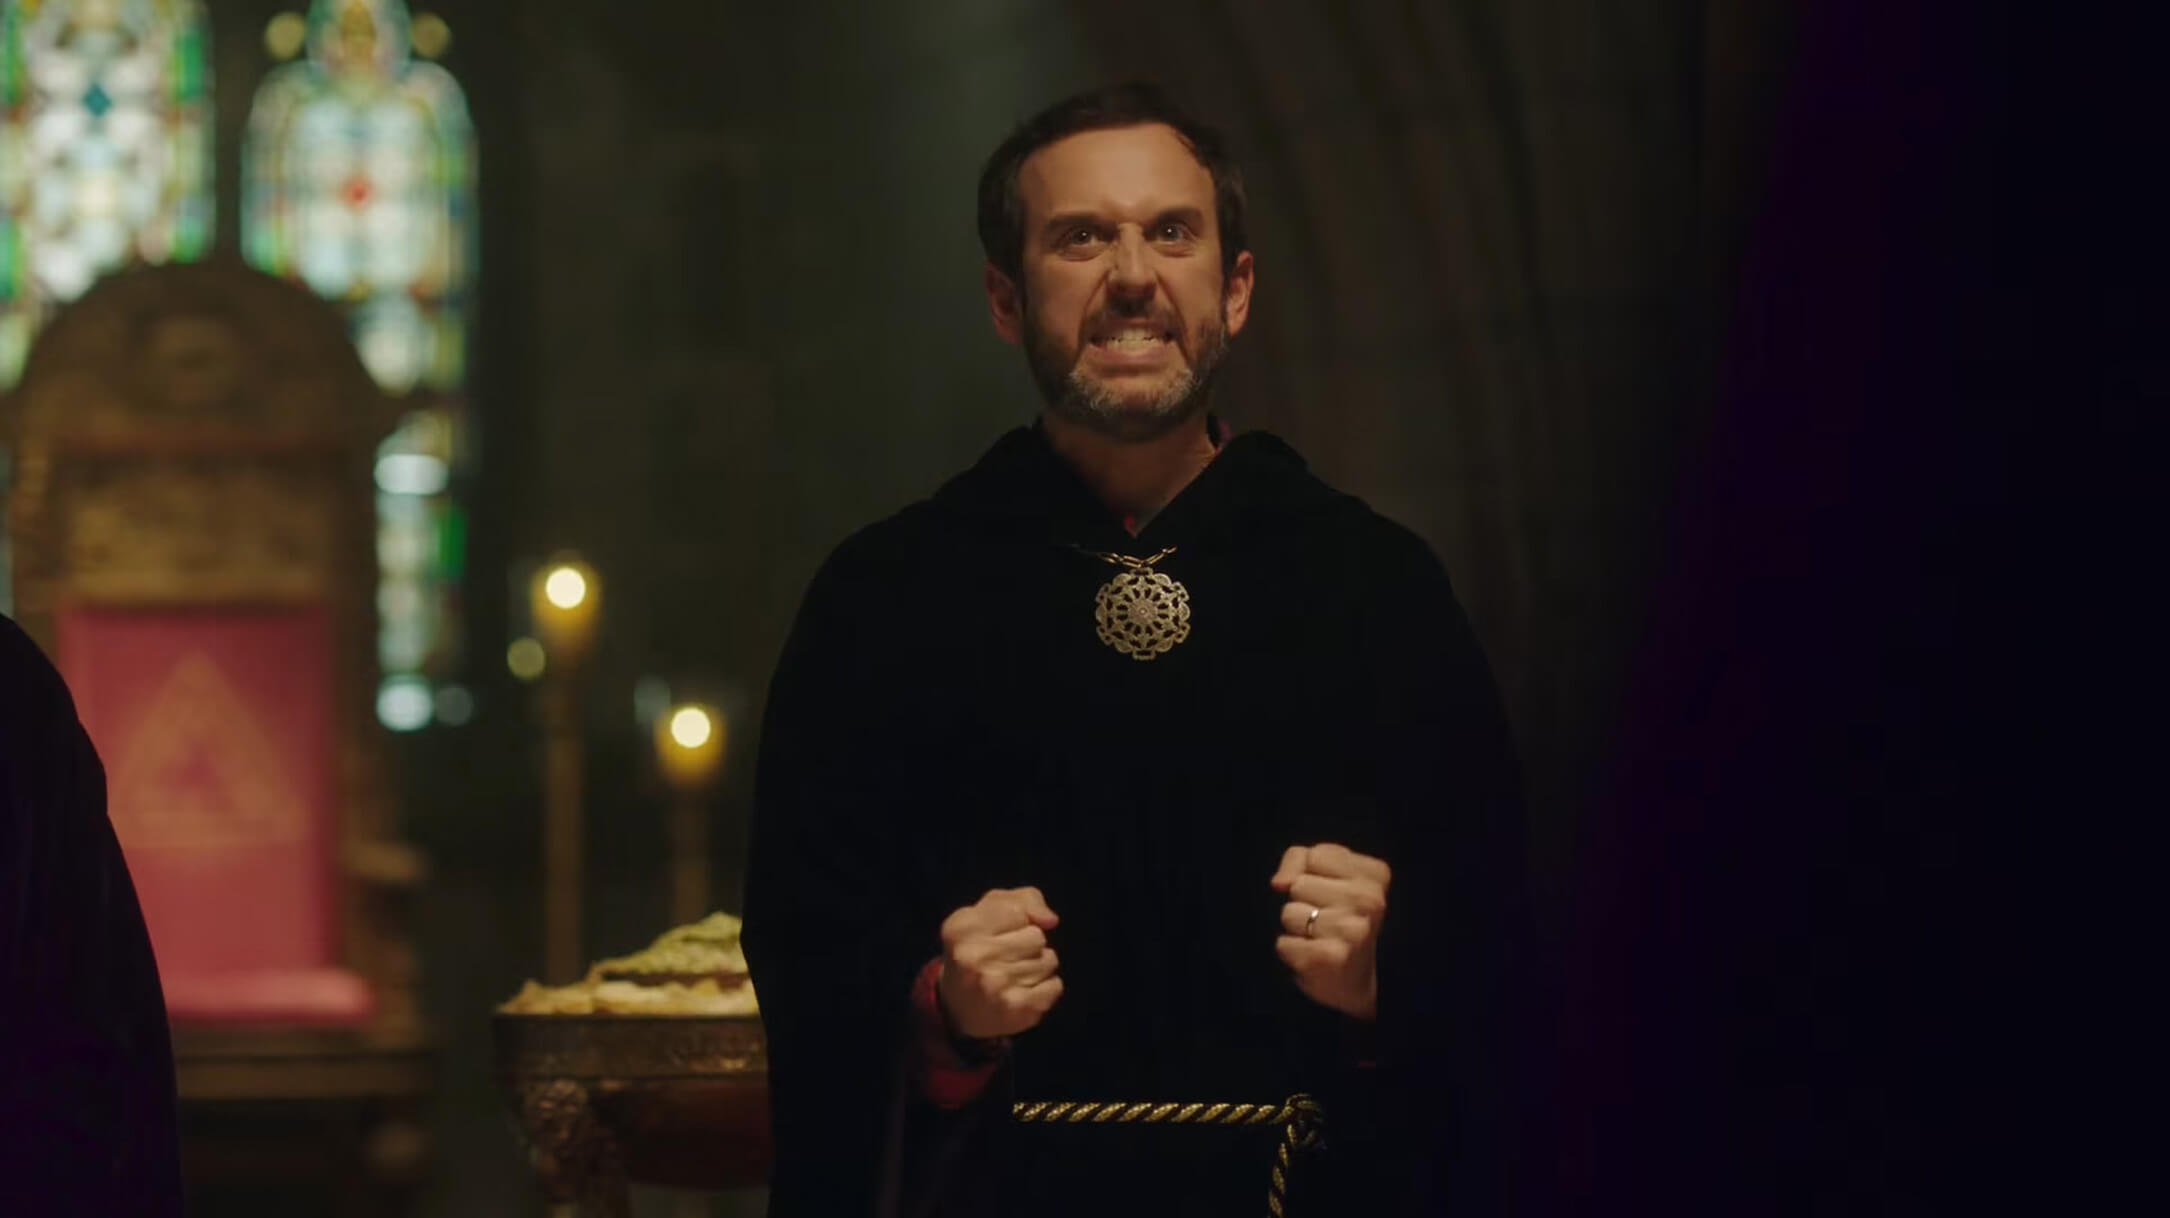 Intense looking man in black robe with closed fists and gritted teeth